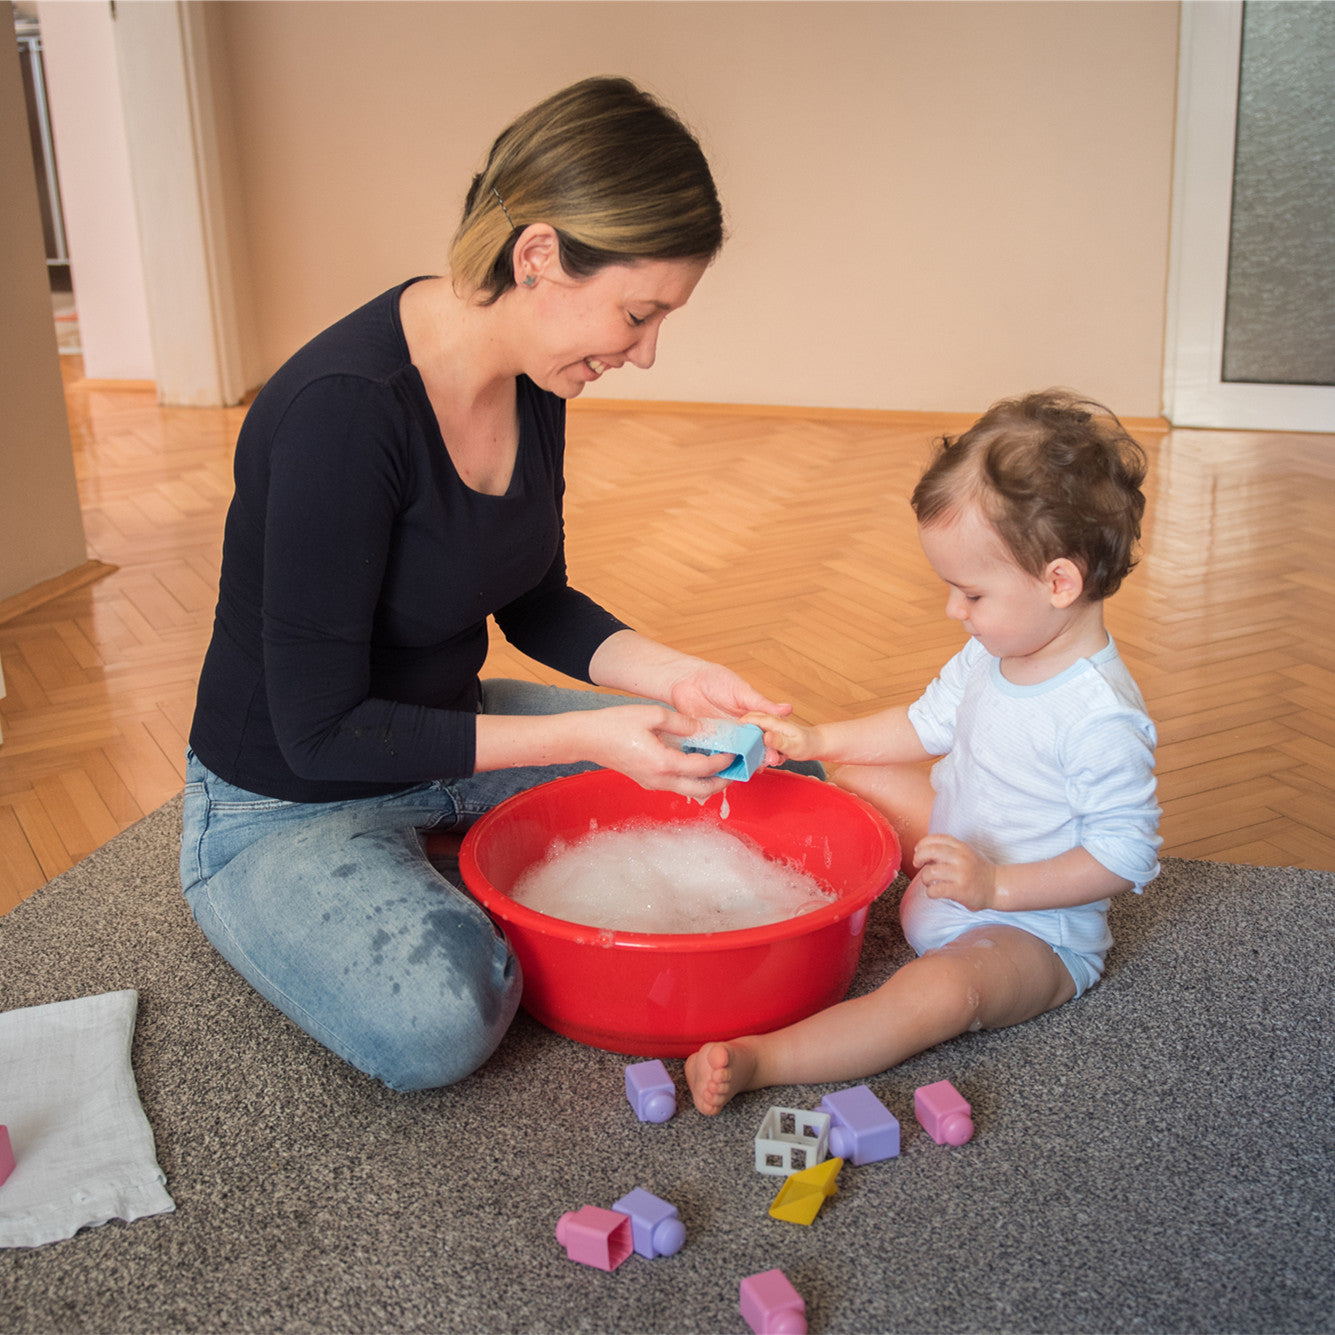 Mother and son playfully washing toys together in a living room